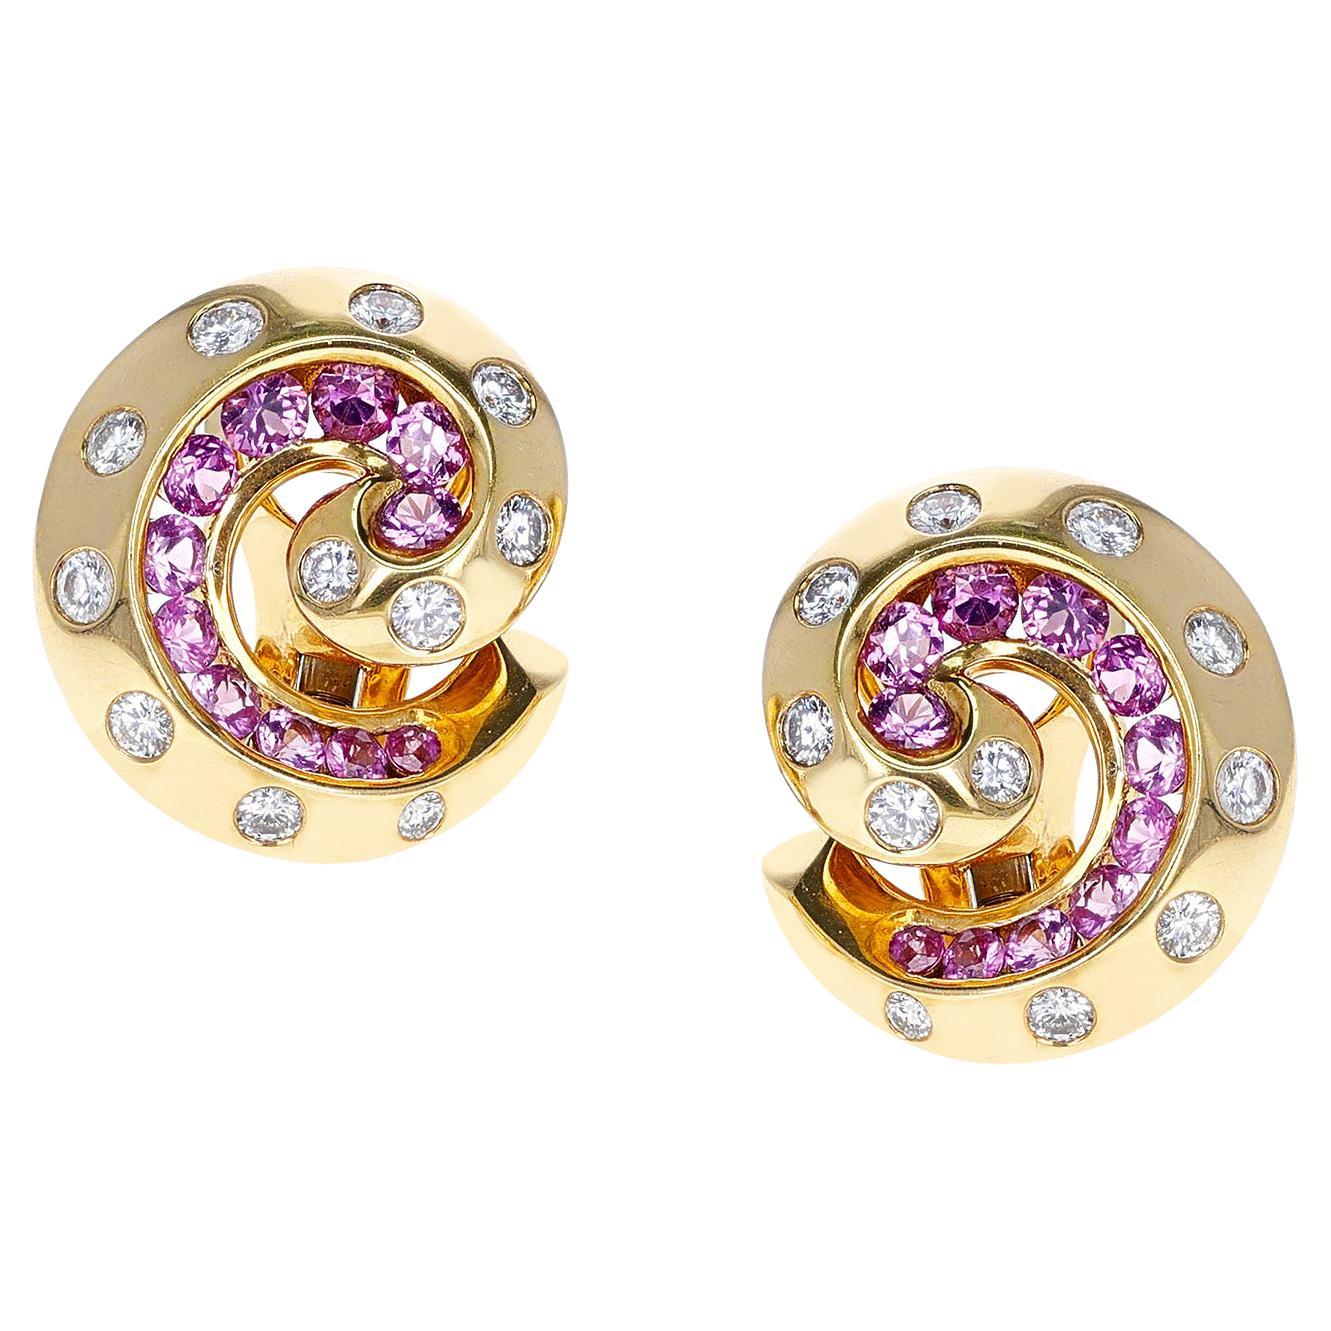 French Van Cleef & Arpels Retro Pink Sapphire and Diamond Swirl Earrings, 18K For Sale